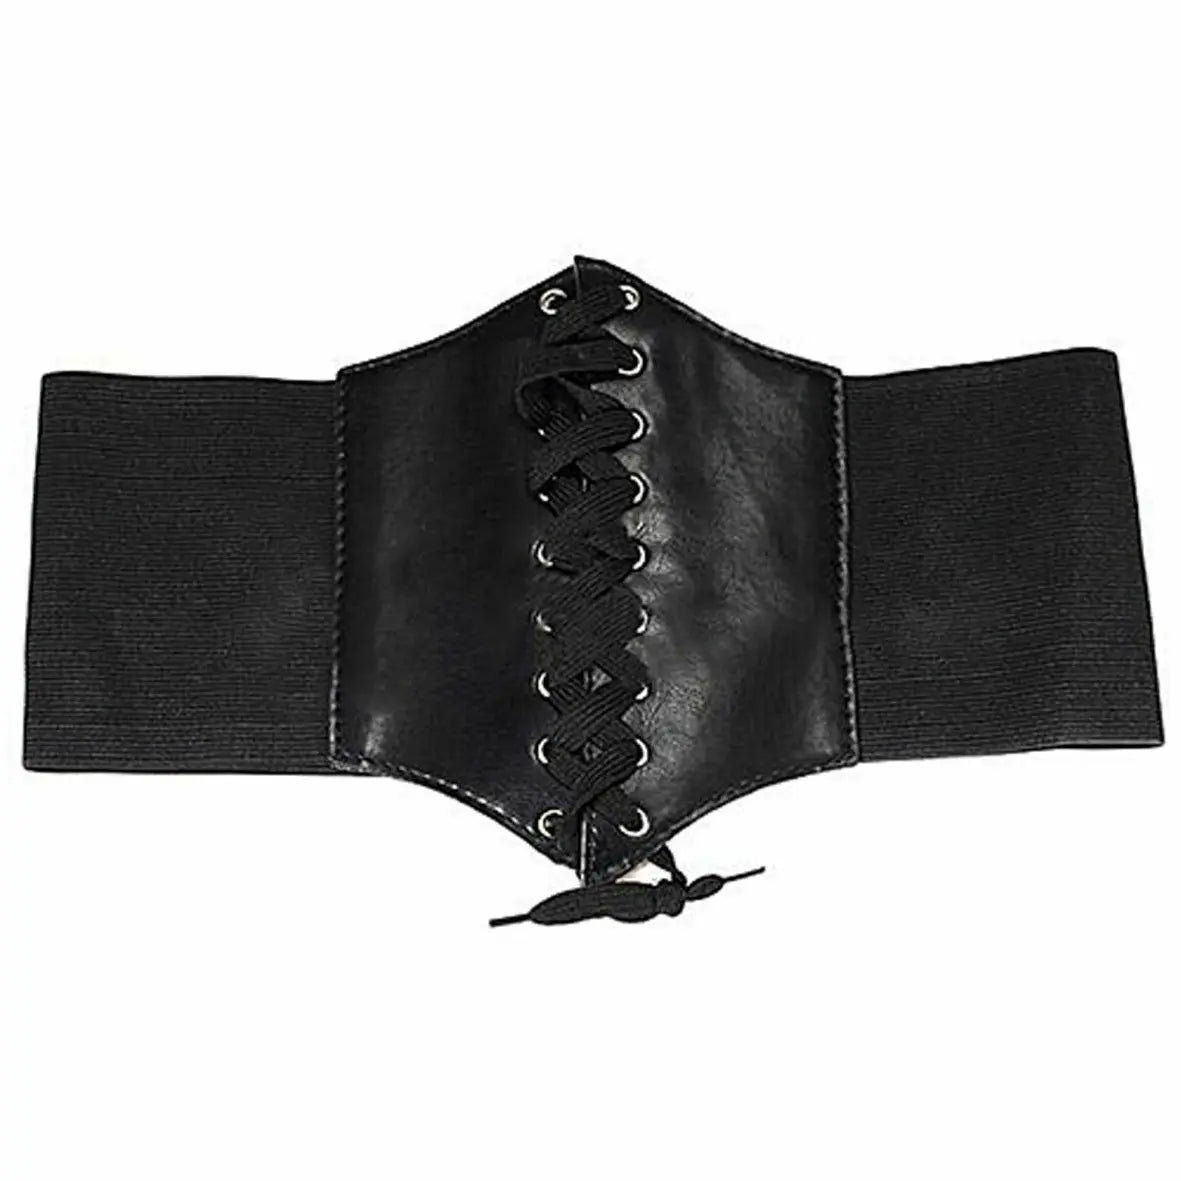 LEATHER-look WAIST CLINCHER BELT WIDE BAND ELASTIC TIED WASPIE CORSET BLACK UK Unbranded